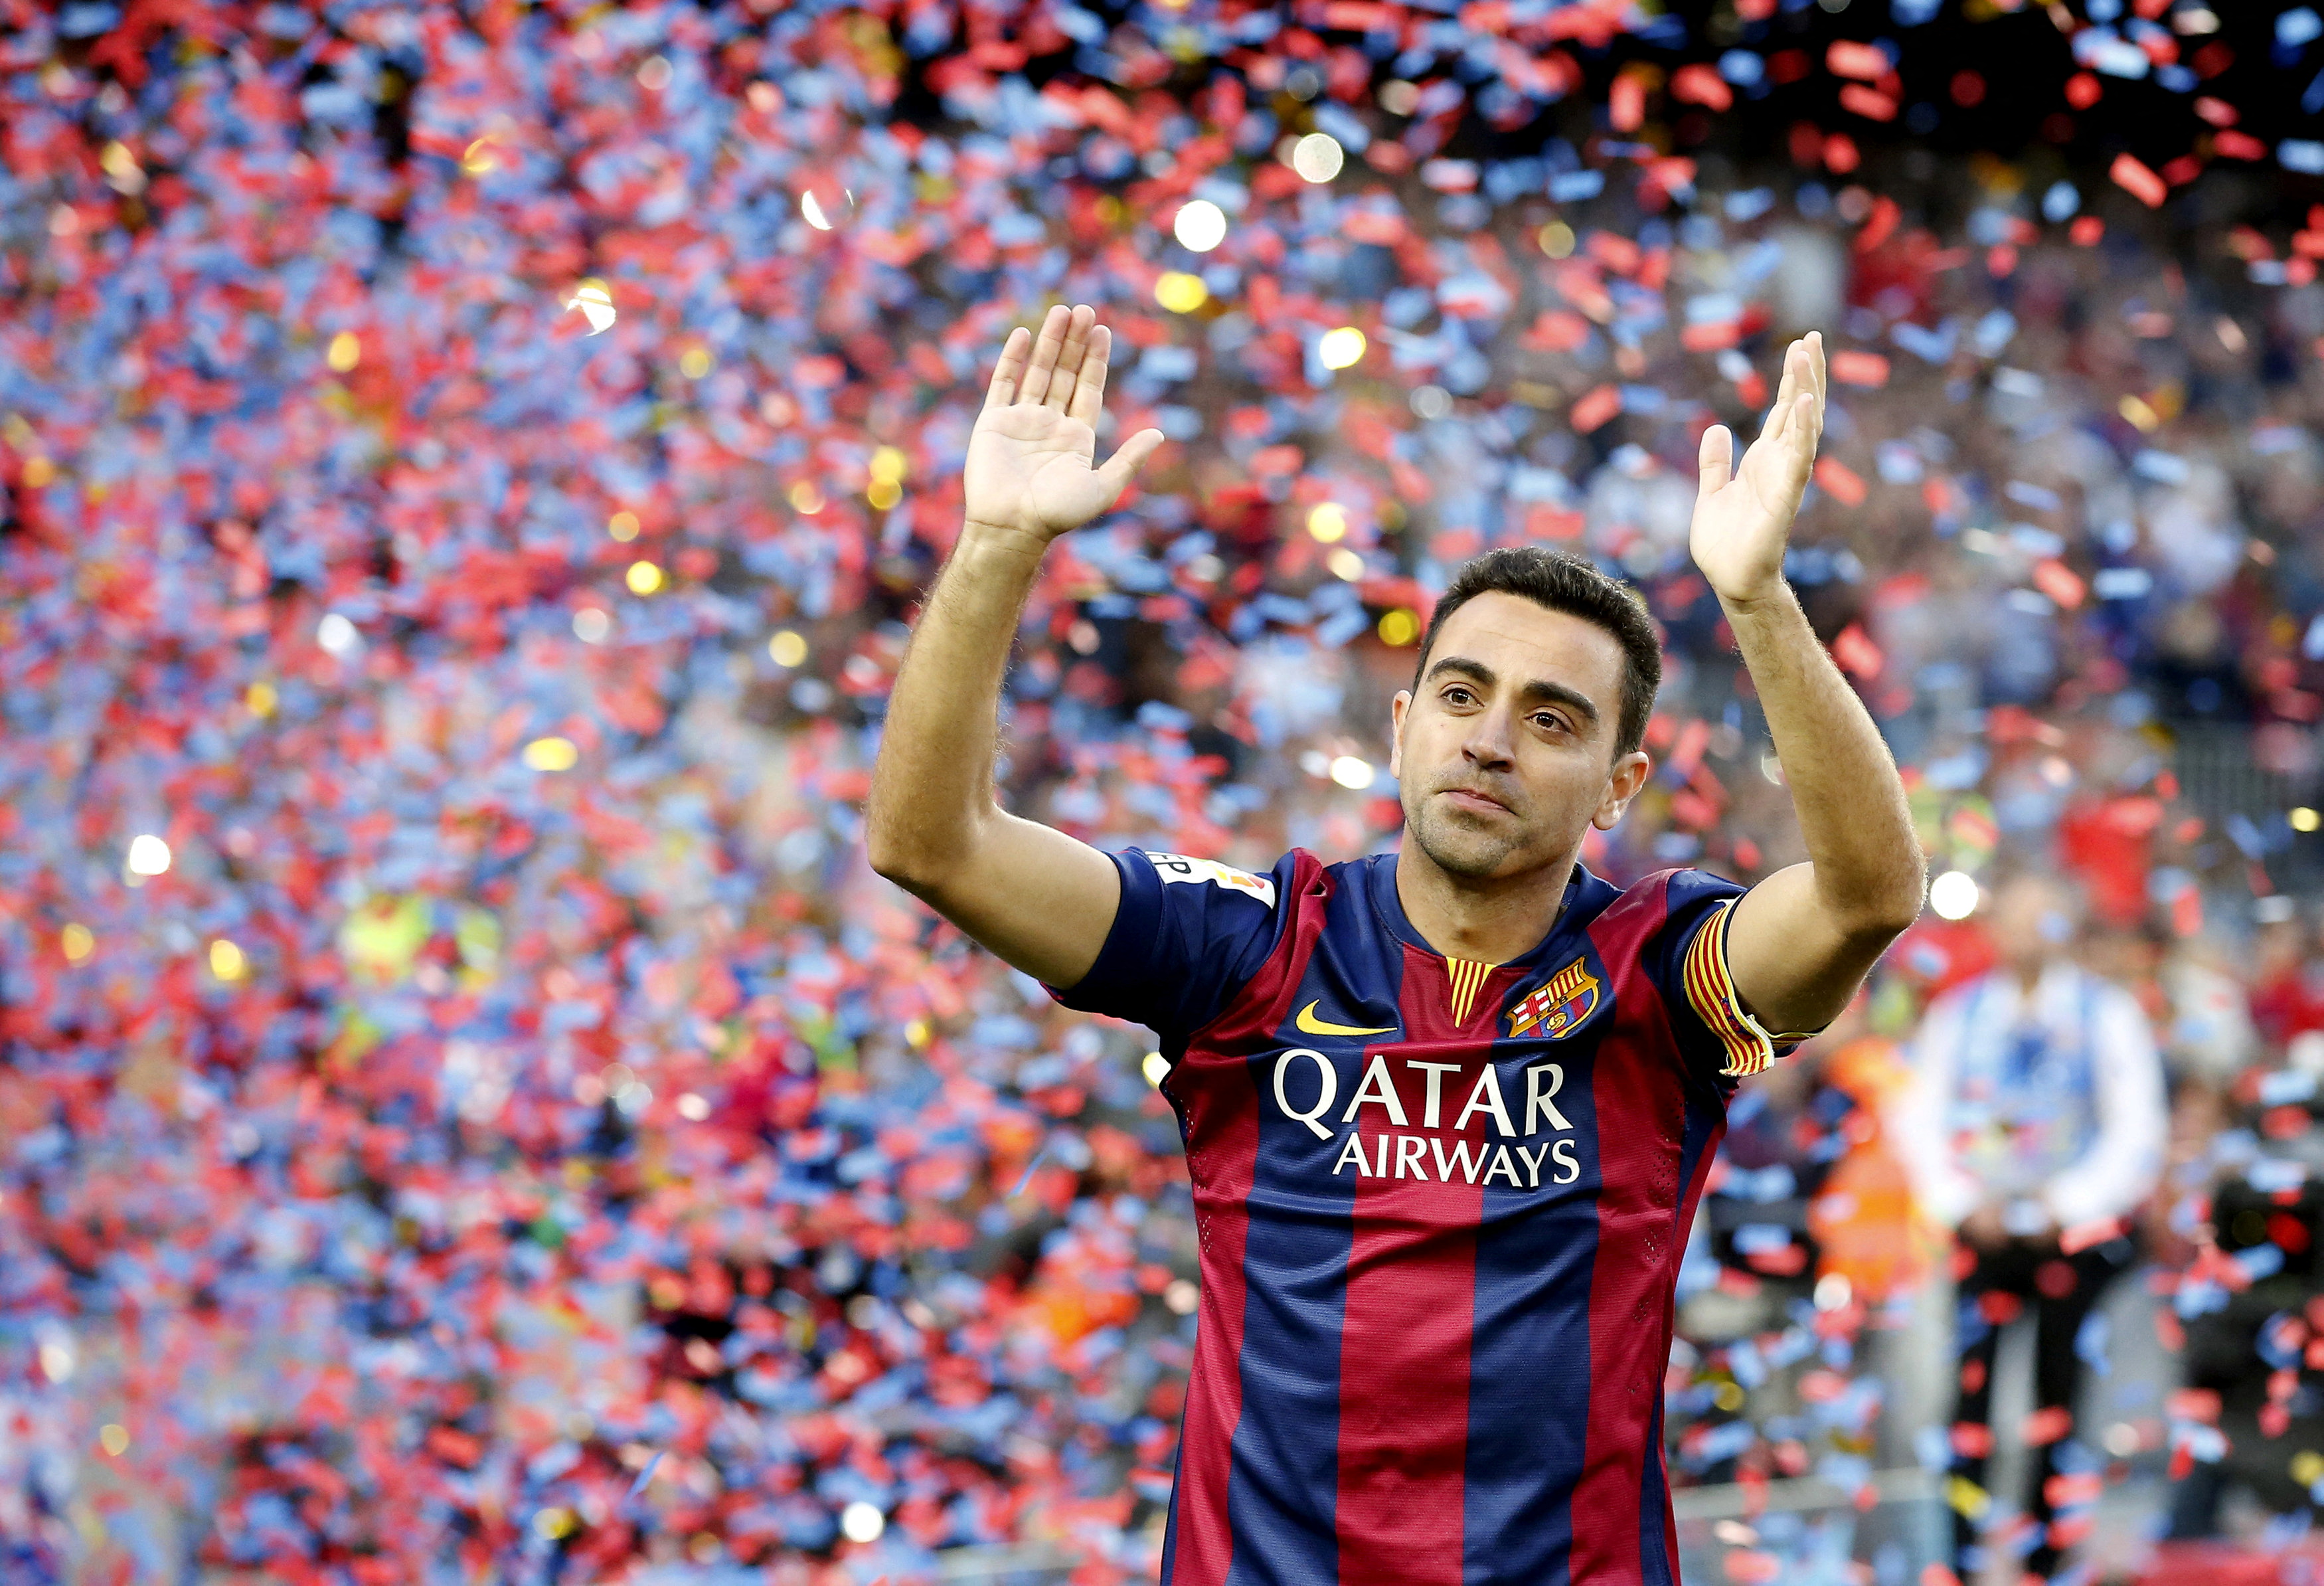 File photo: Barcelona's Xavi Hernandez waves to supporters after their Spanish first division soccer match against Deportivo de la Coruna at Camp Nou stadium in Barcelona